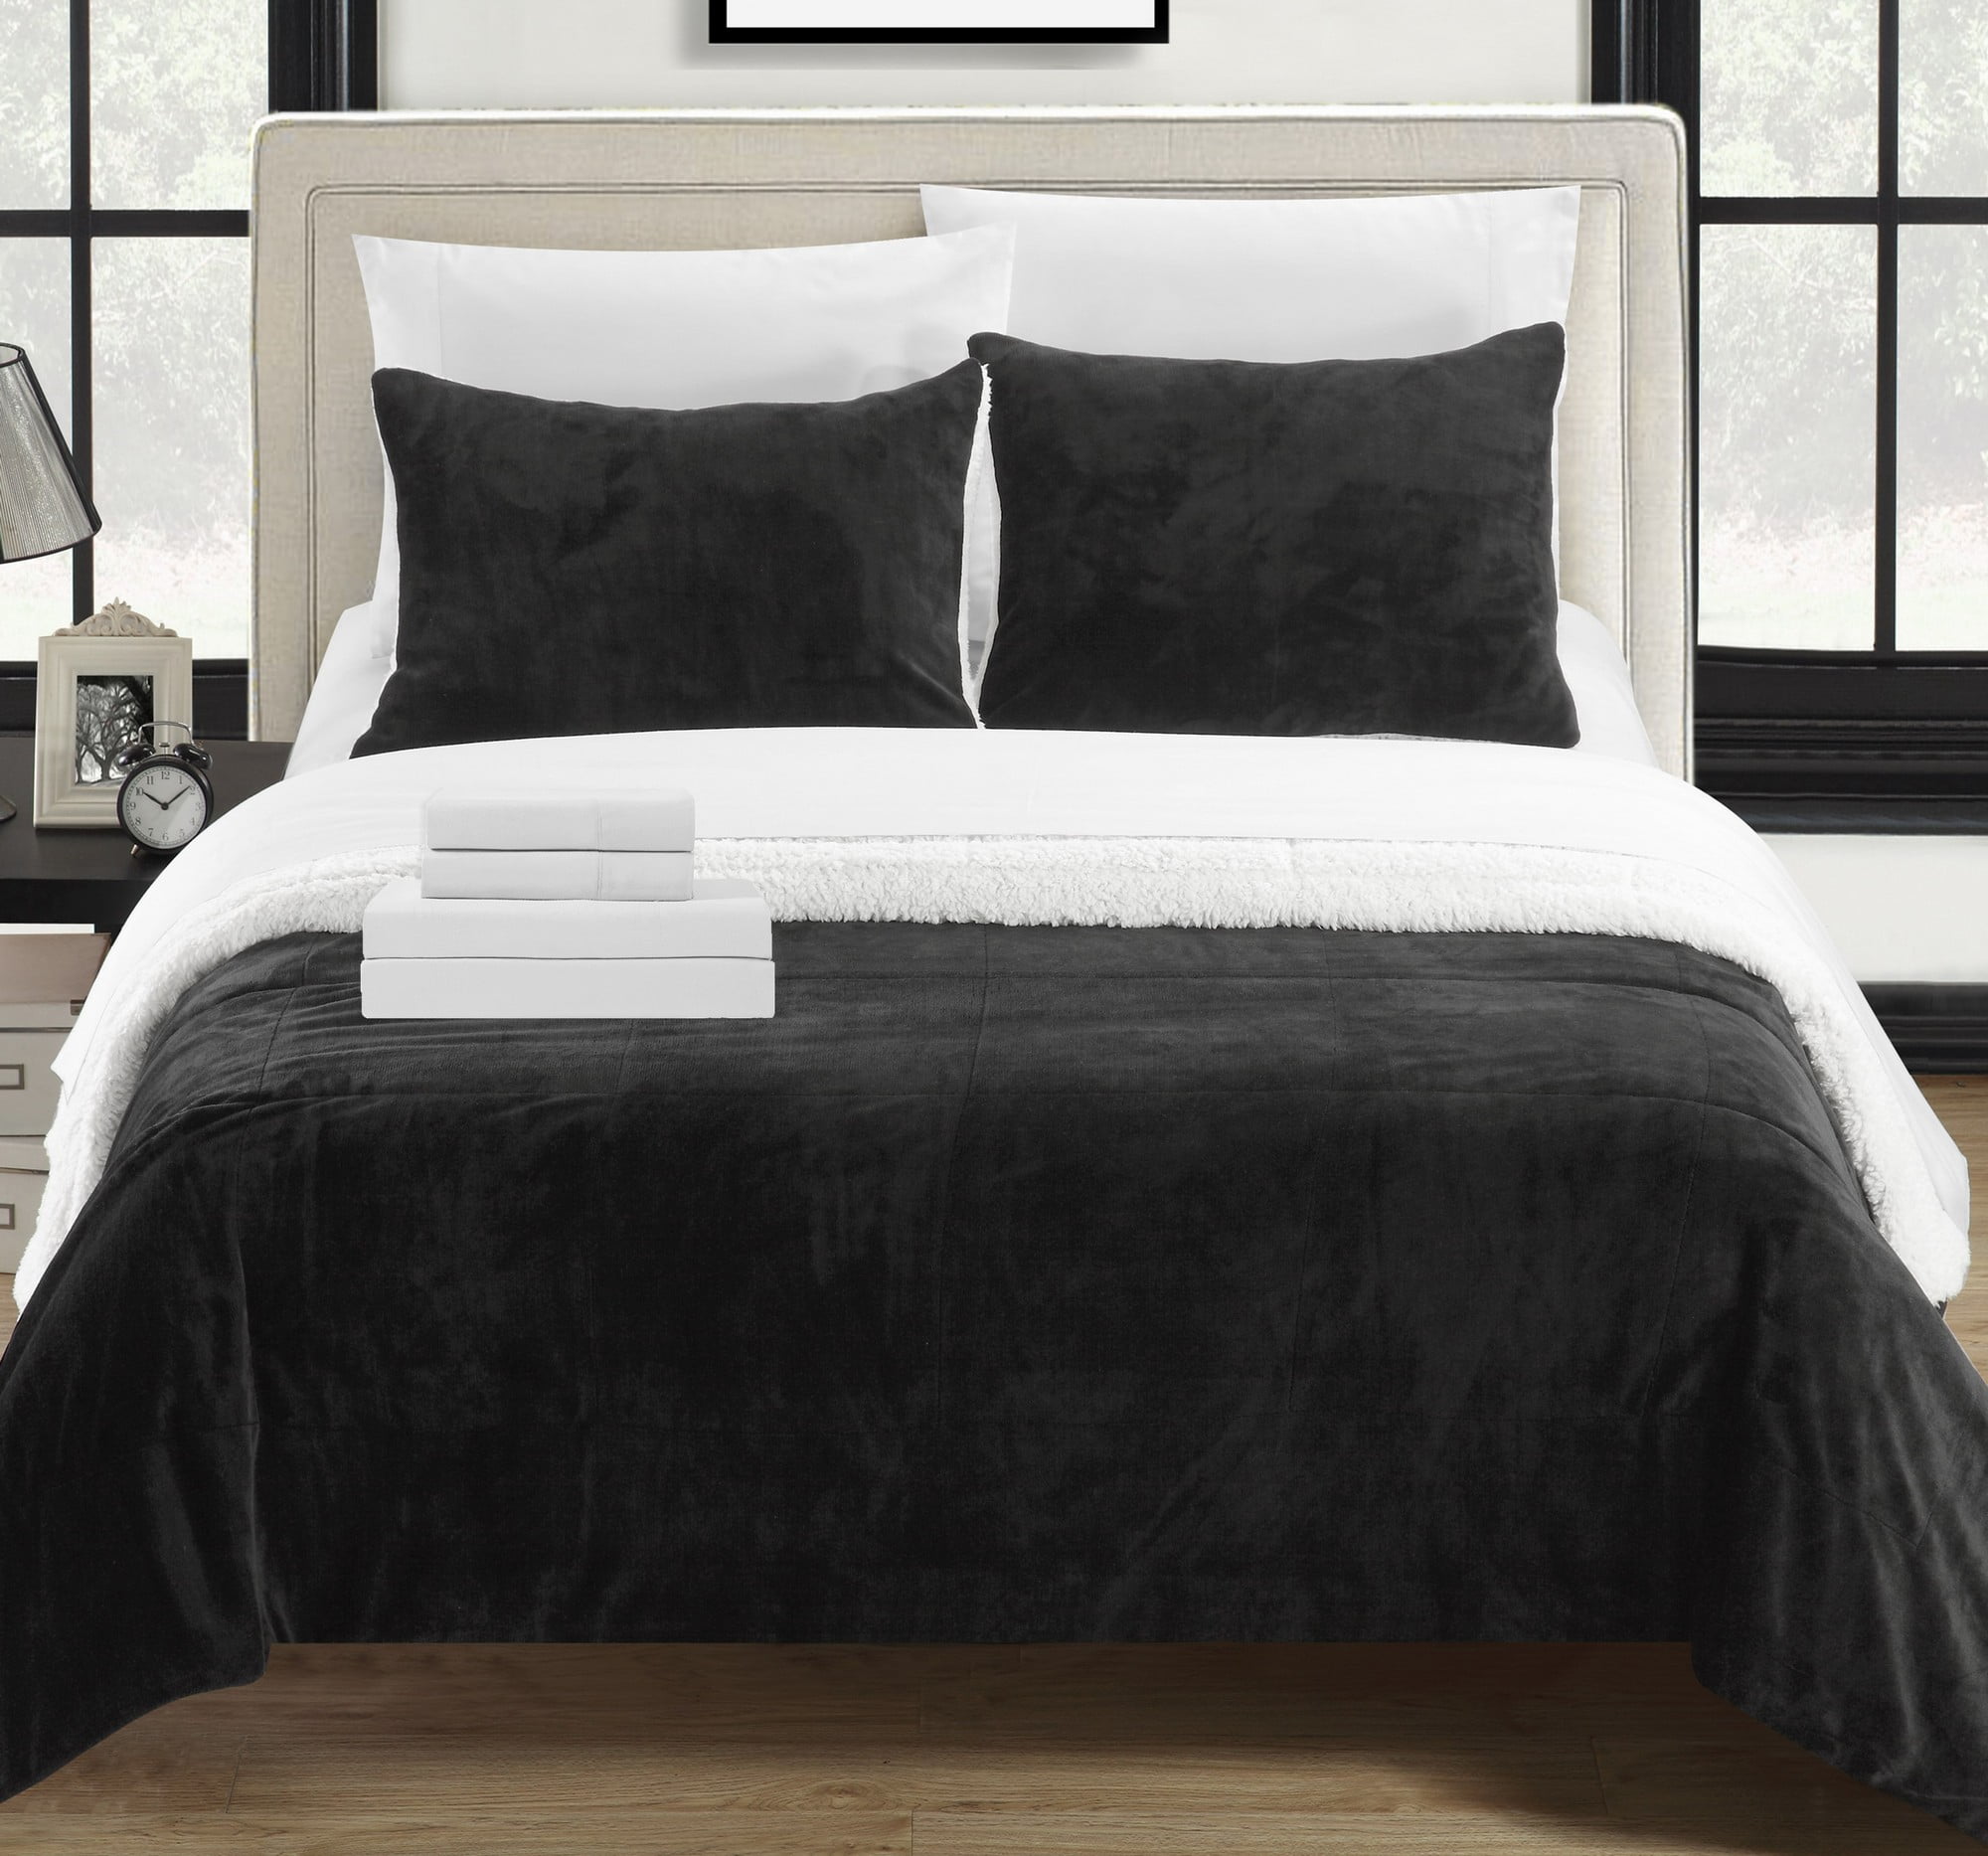 Details about   Royal Opulence Divatex Home Fashions Satin Queen Sheet Set Black 